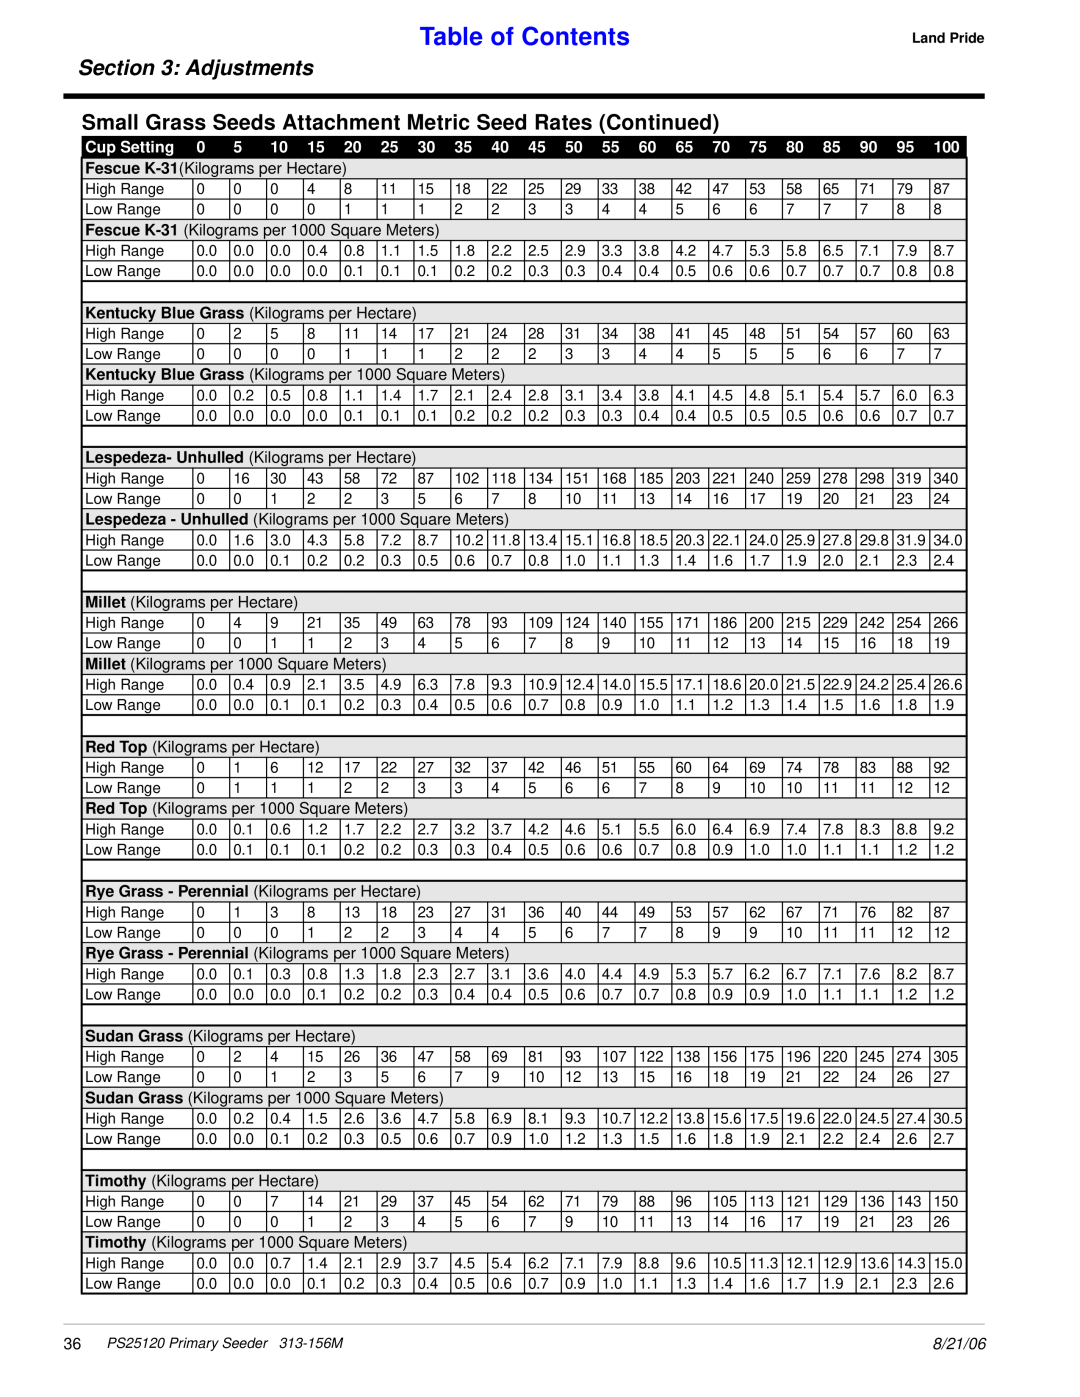 Land Pride PS25120 manual Table of Contents, Adjustments, Fescue K-31, Kilograms per Hectare, 8/21/06 